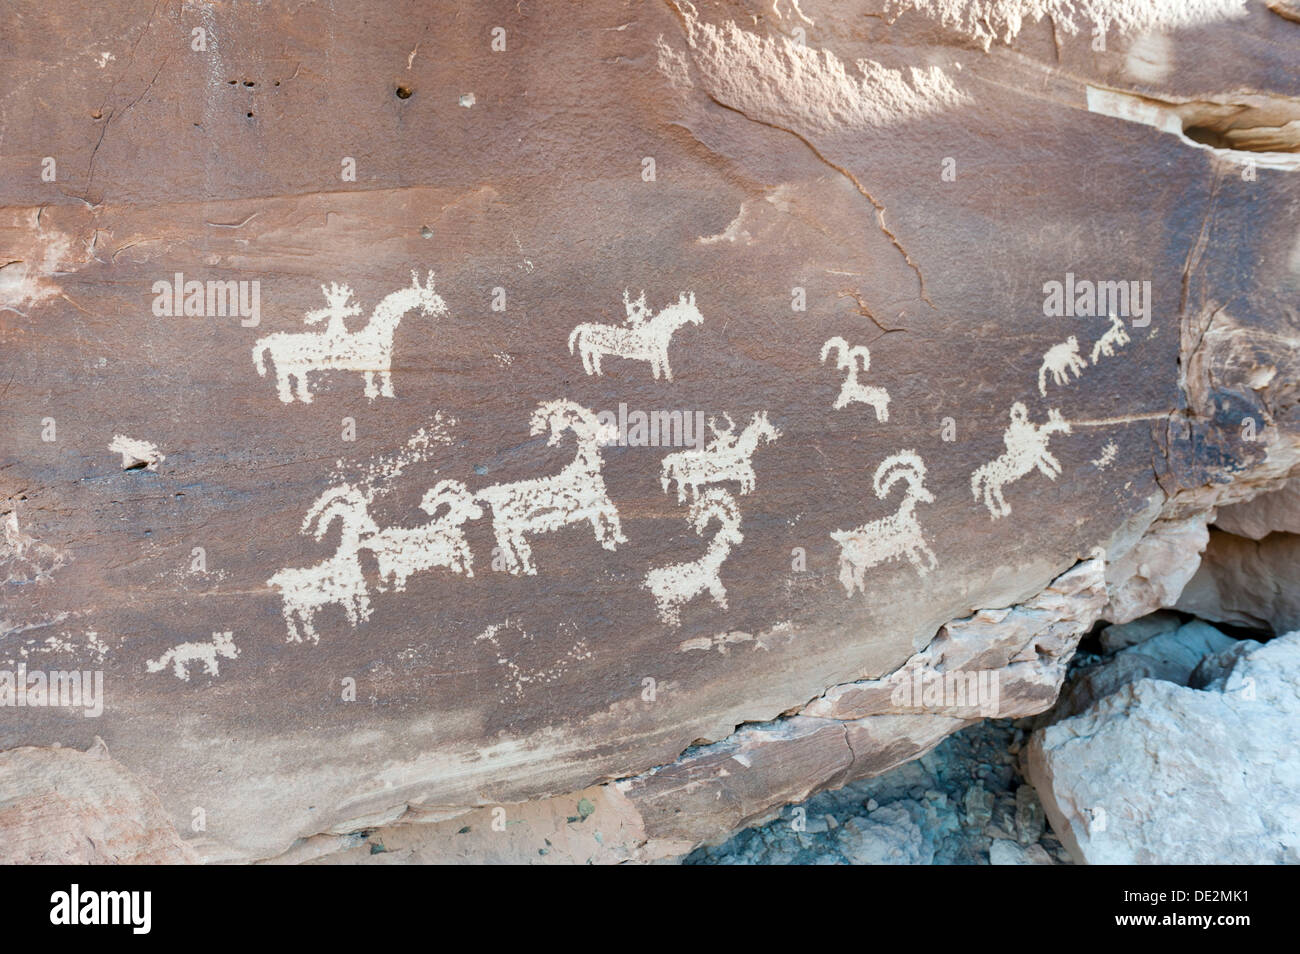 Petroglyphs of the Ute Indians, animals and riders on horseback carved in a rock, Arches National Park, Utah Stock Photo